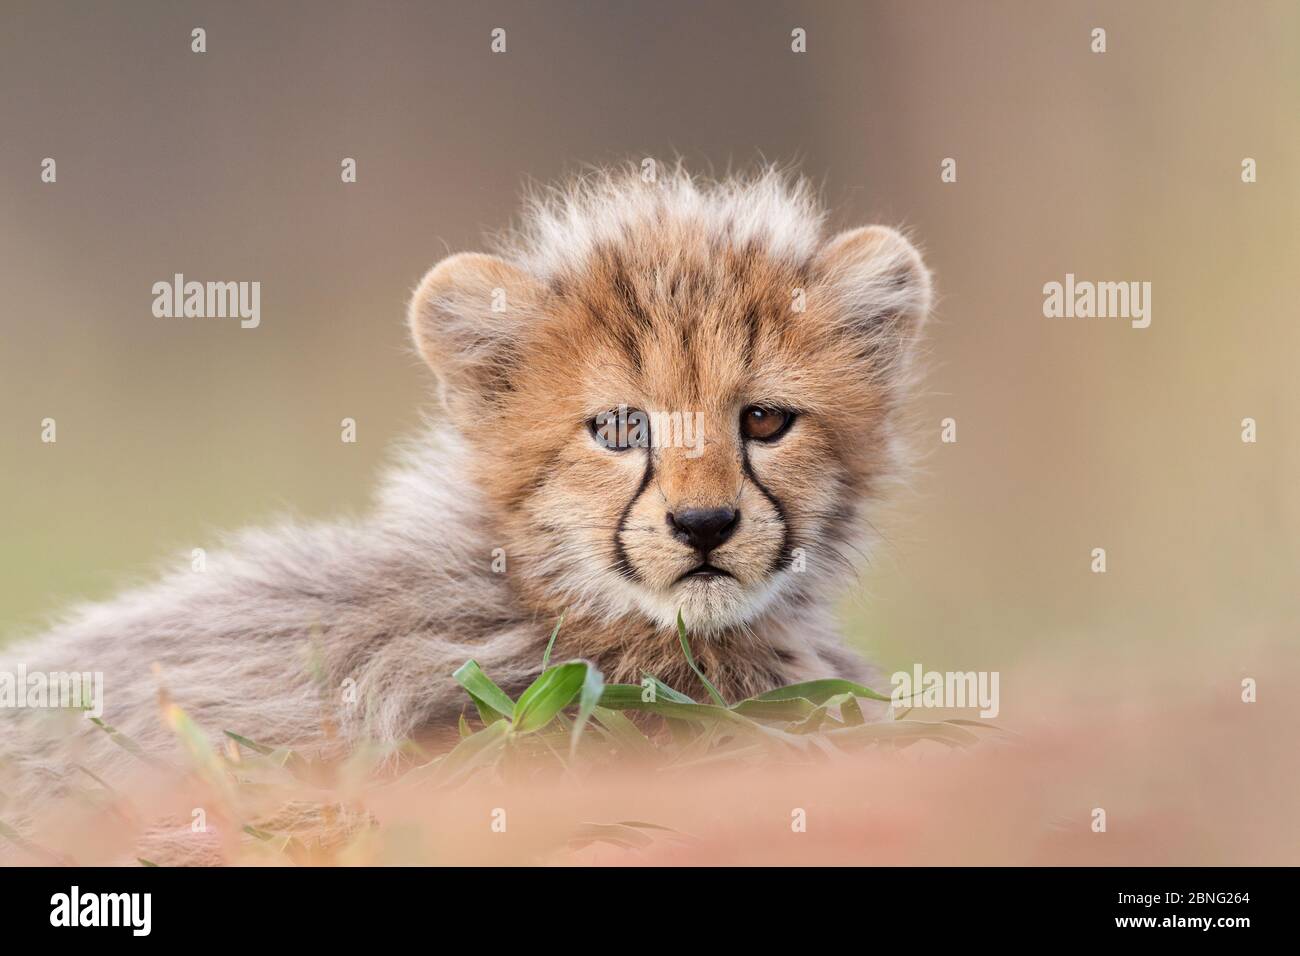 Small cute baby cheetah lying down on grass in Kruger Park South Africa Stock Photo